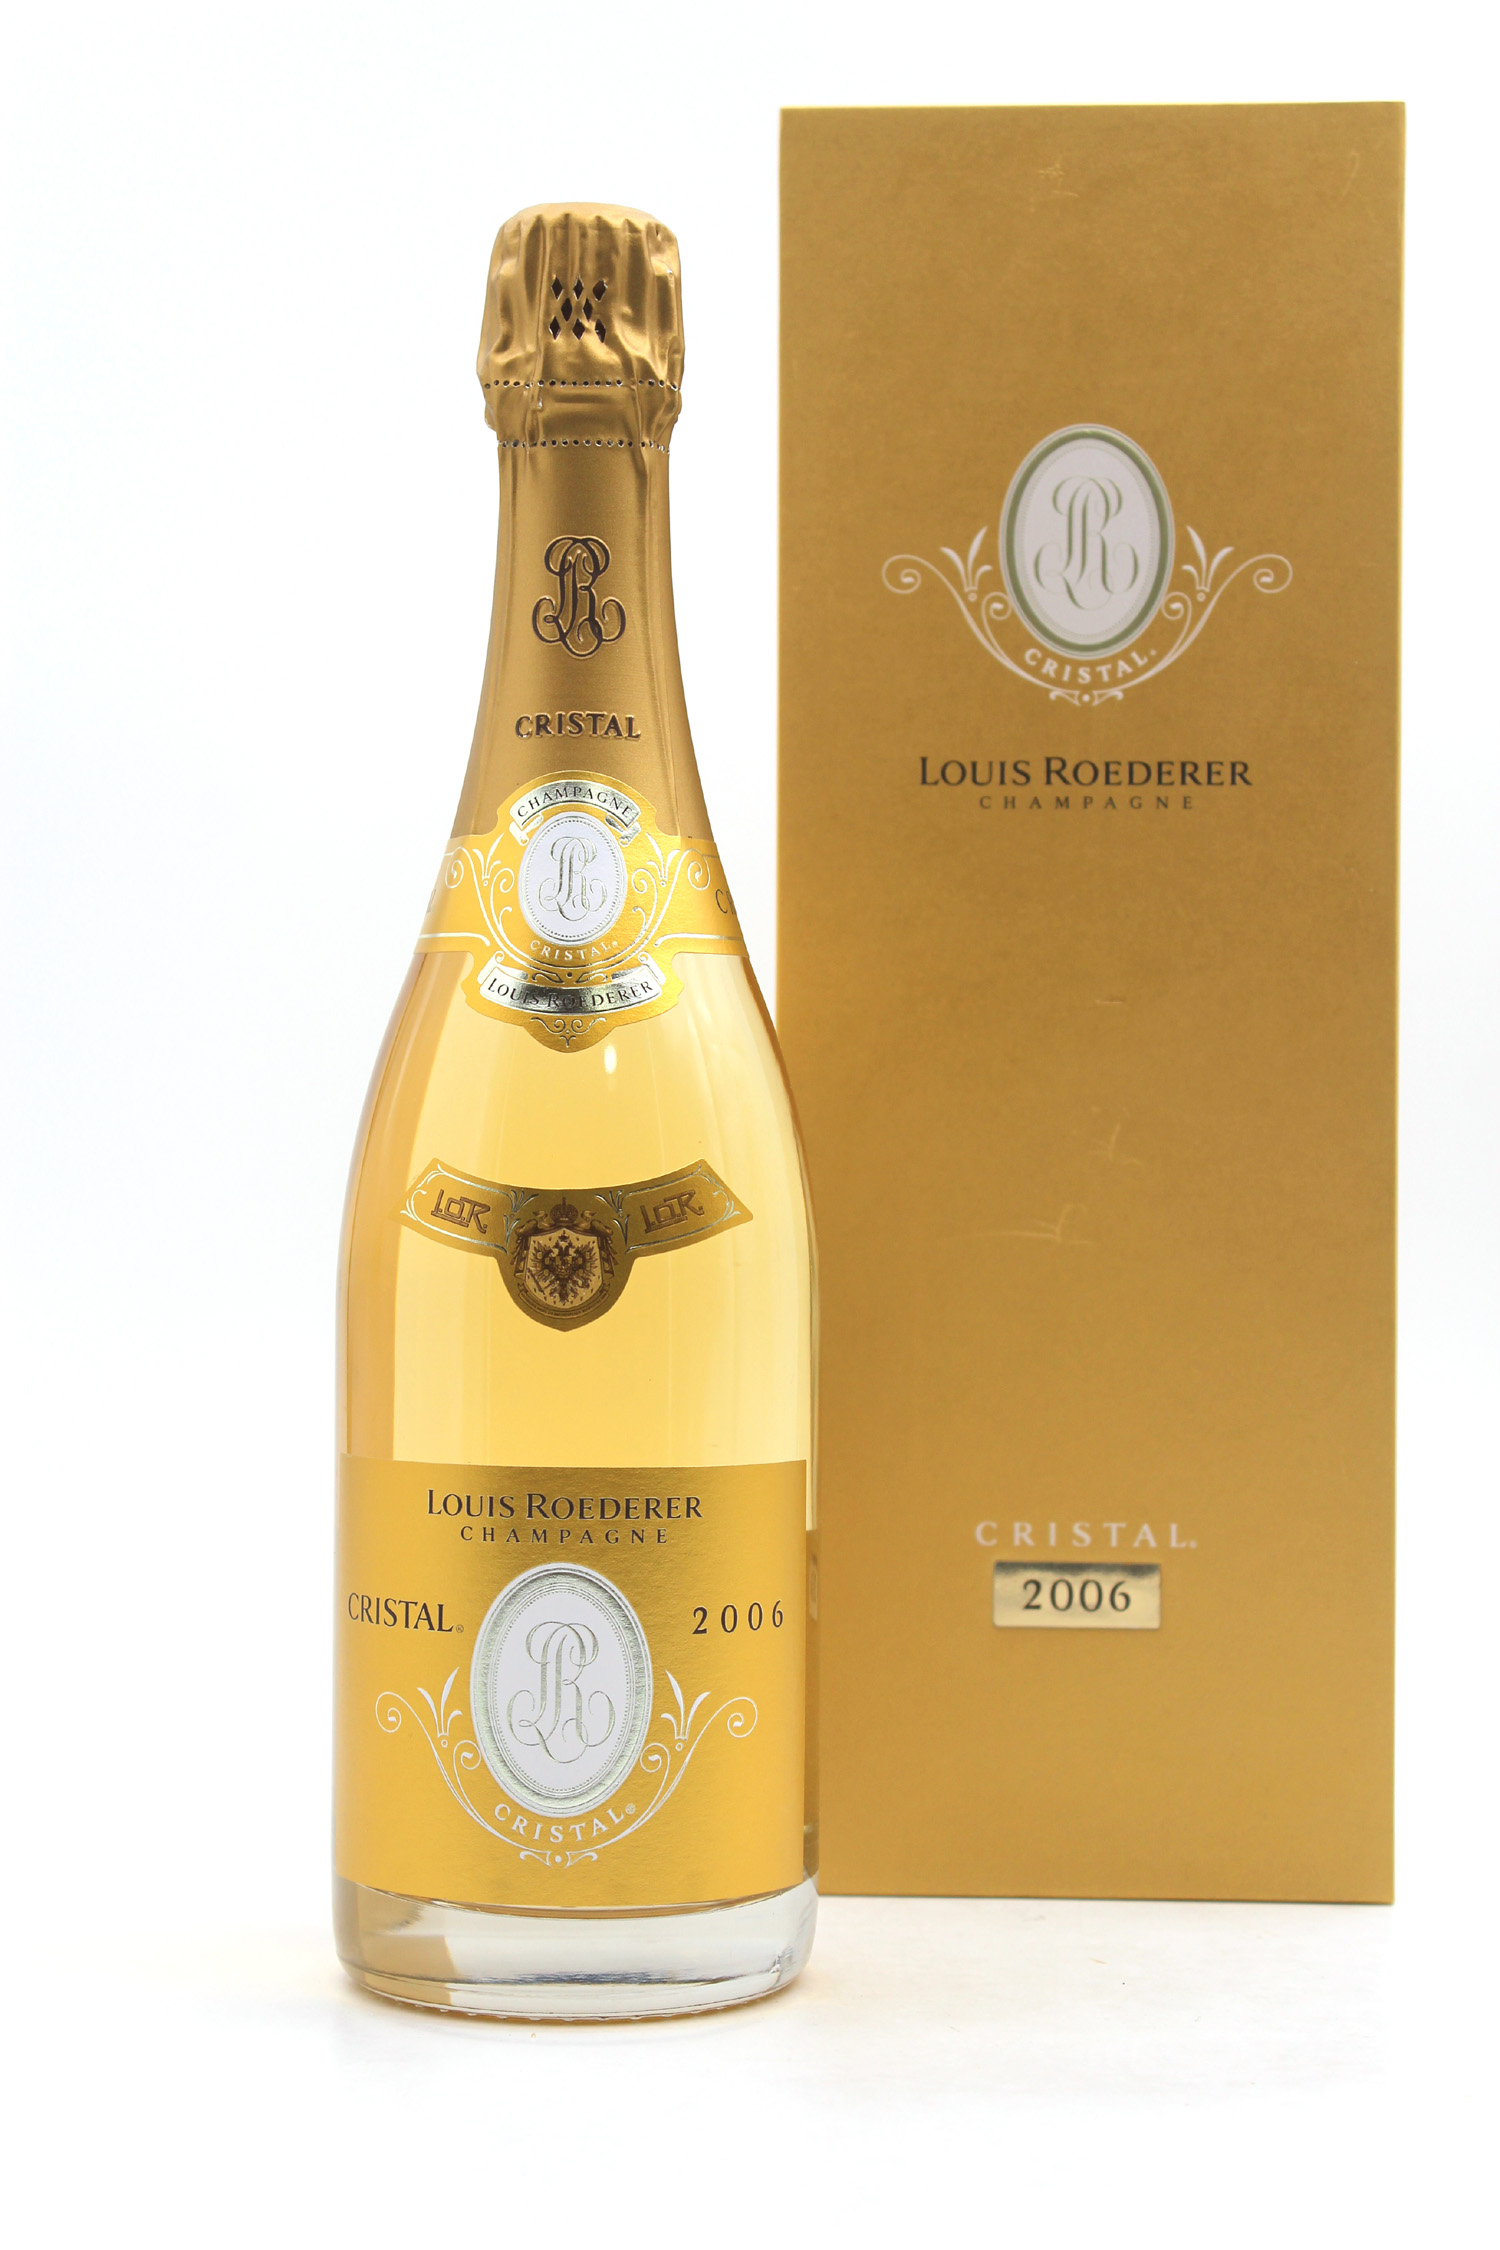 Cristal Roedere 2006